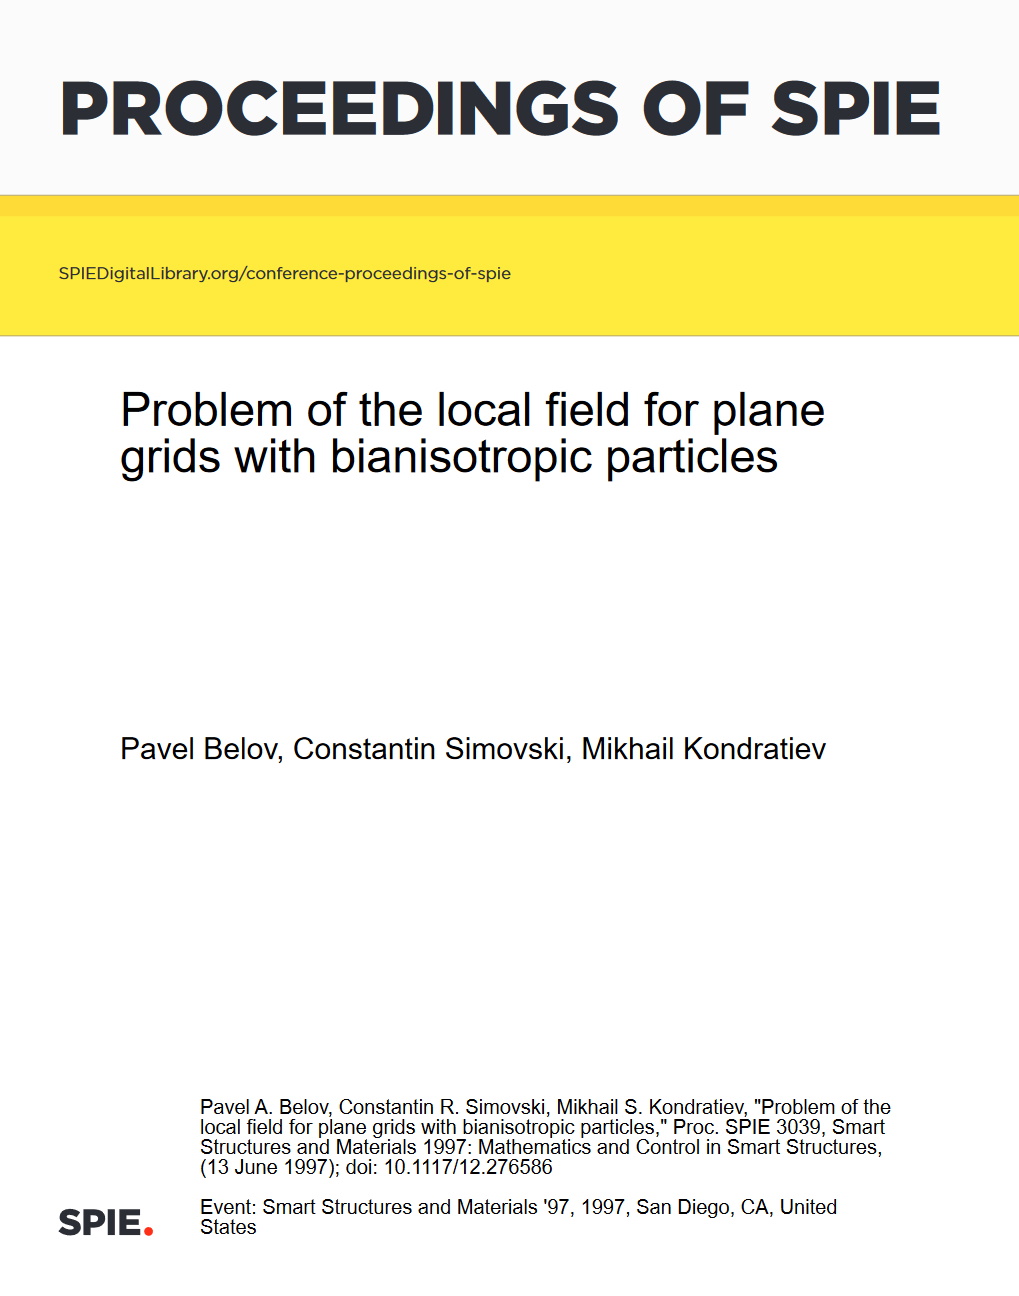 Problem of the local field for plane grids with bianisotropic particles